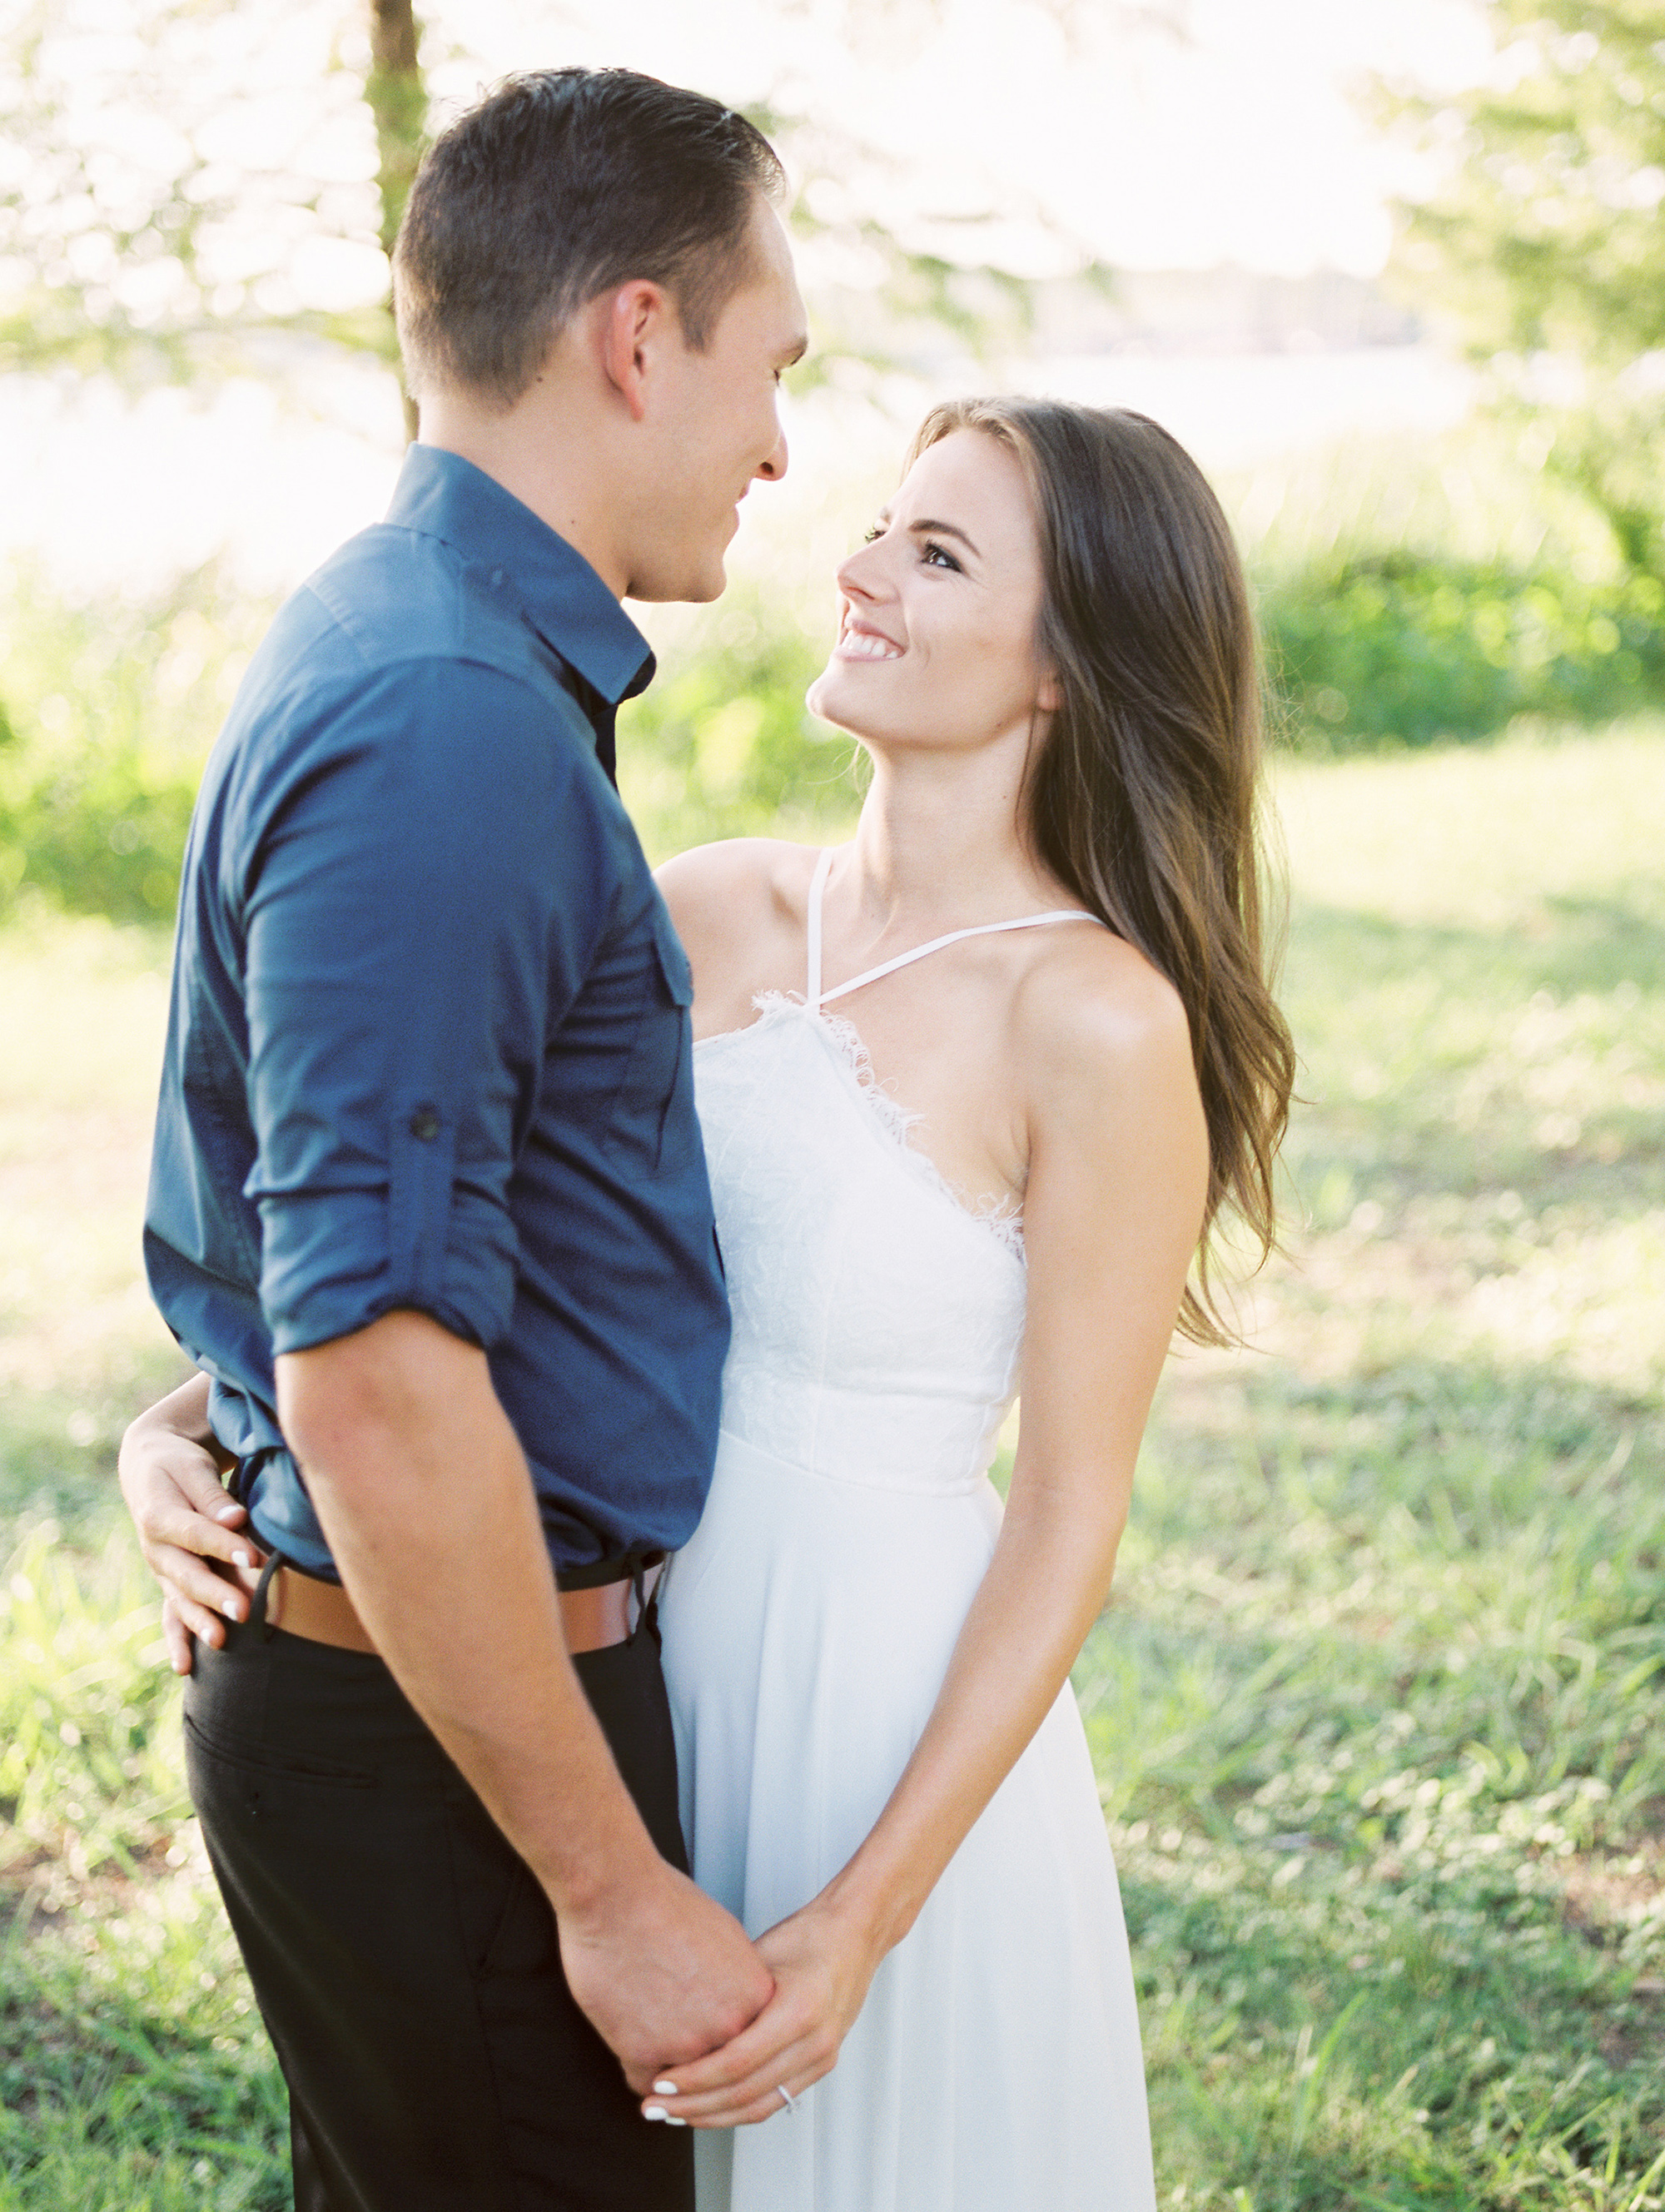 White Rock Lake engagement session from Dallas wedding photographer Tenth & Grace.